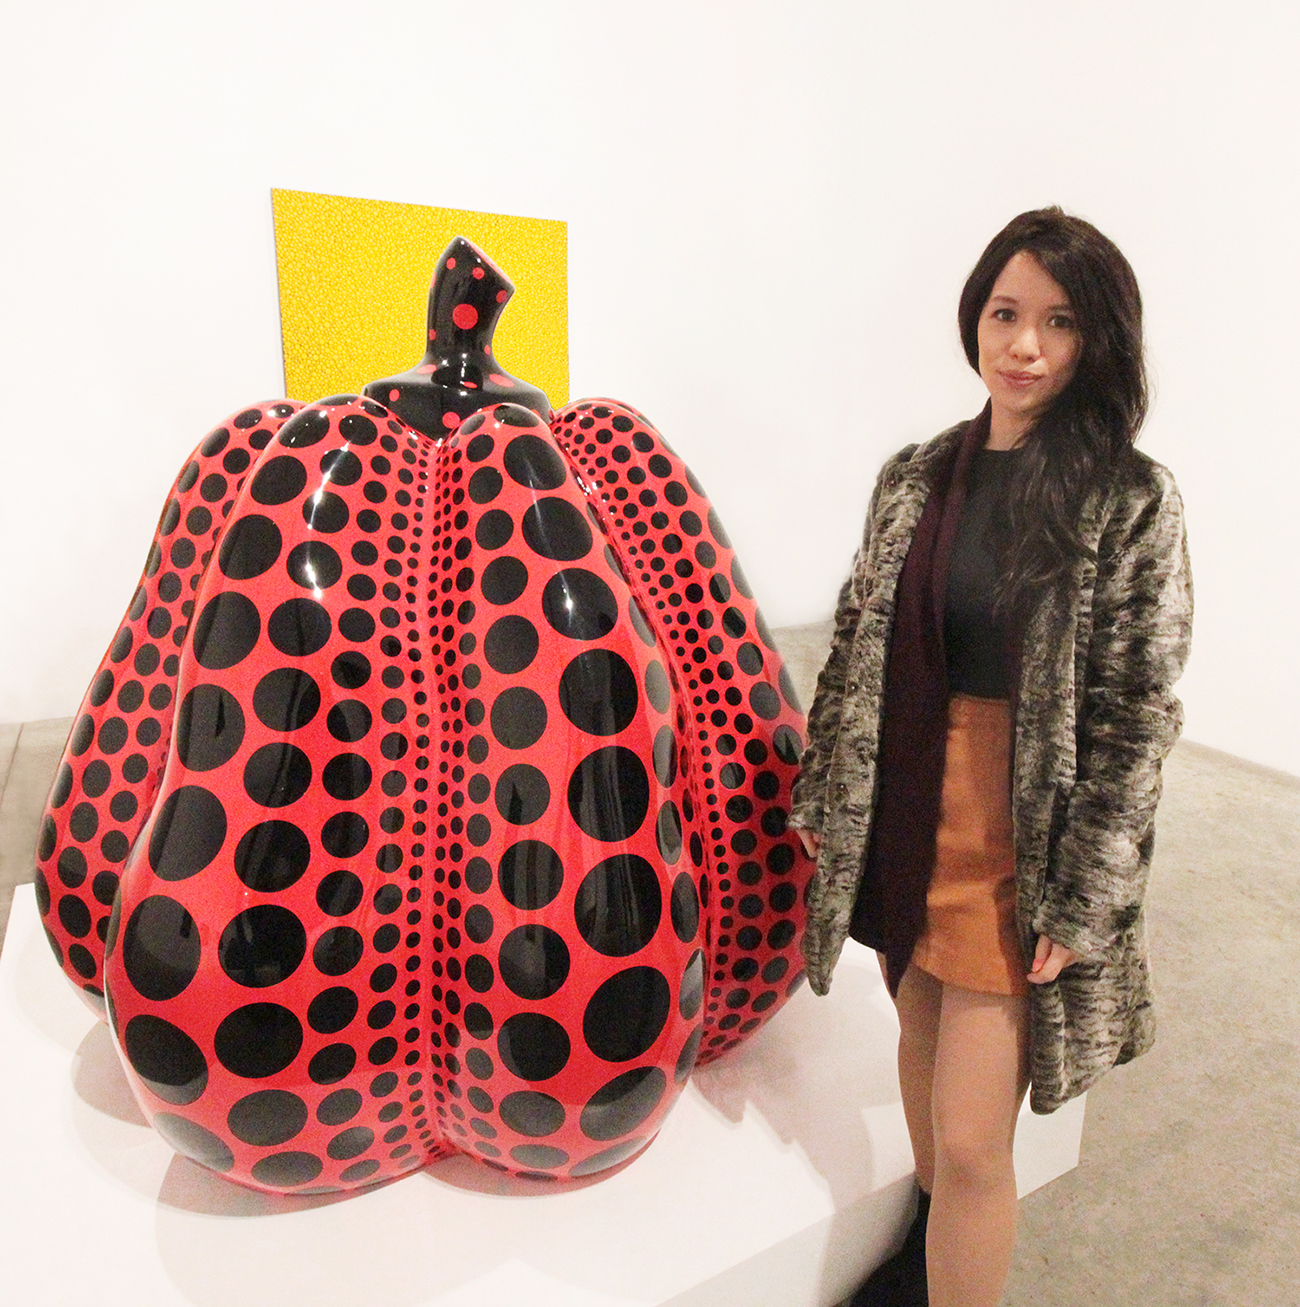 Polka dotted pumpkin - inside the Yayoi Kusama exhibition at the Miro Gallery in London 2018